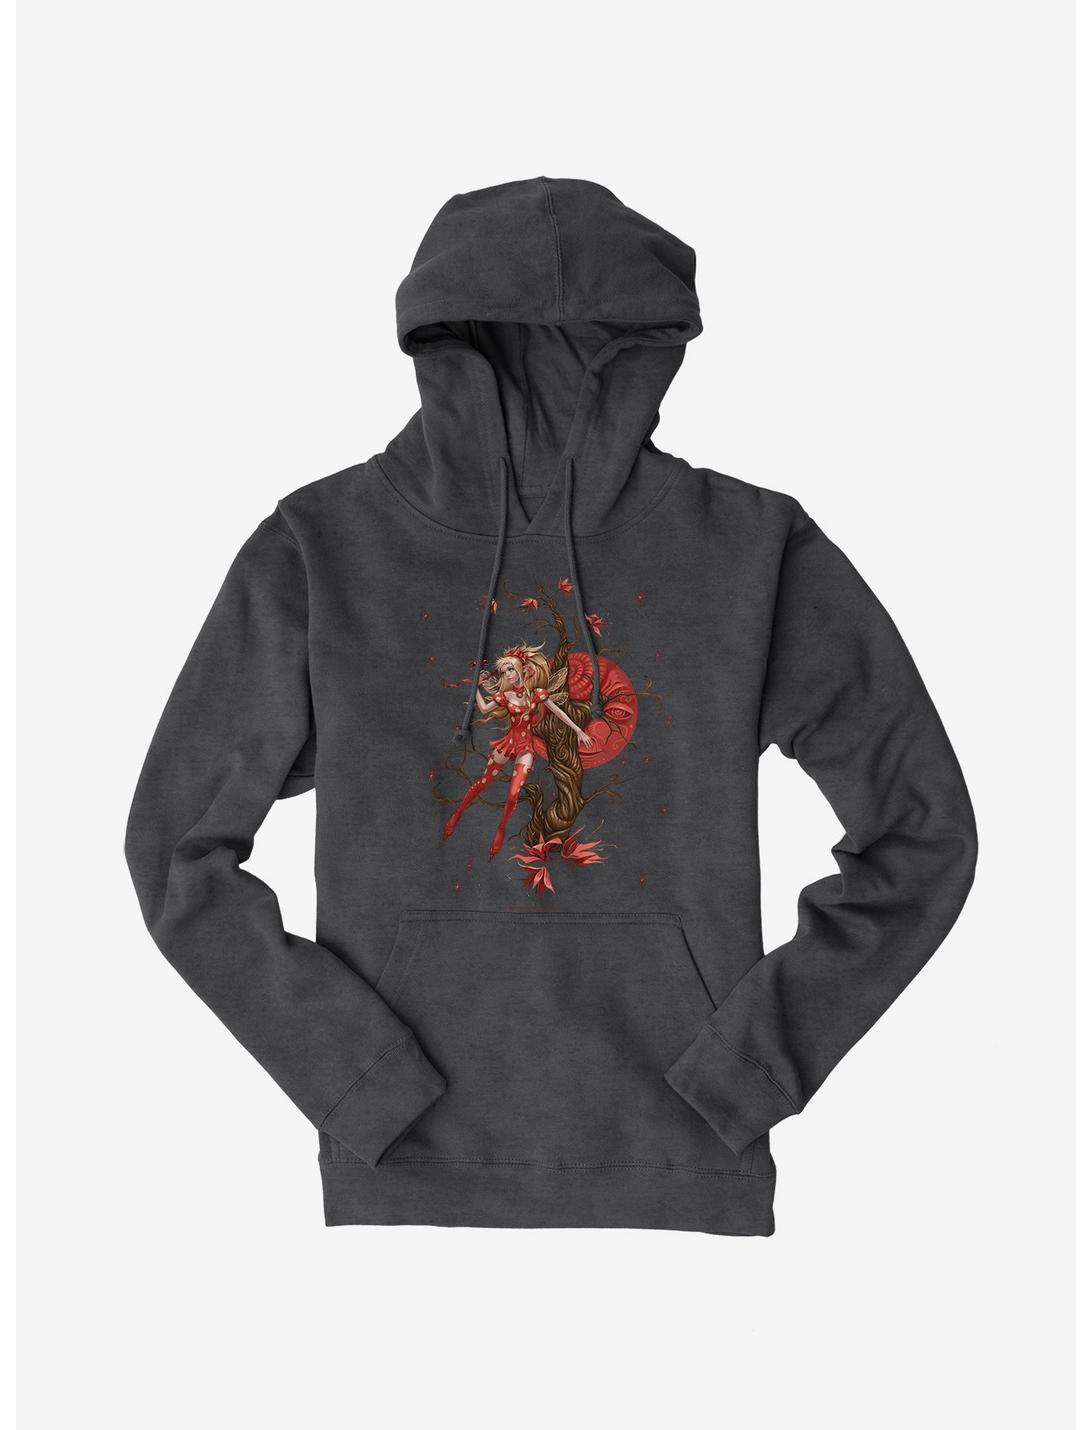 Fairies By Trick Lady Bug Love Fairy Hoodie, CHARCOAL HEATHER, hi-res